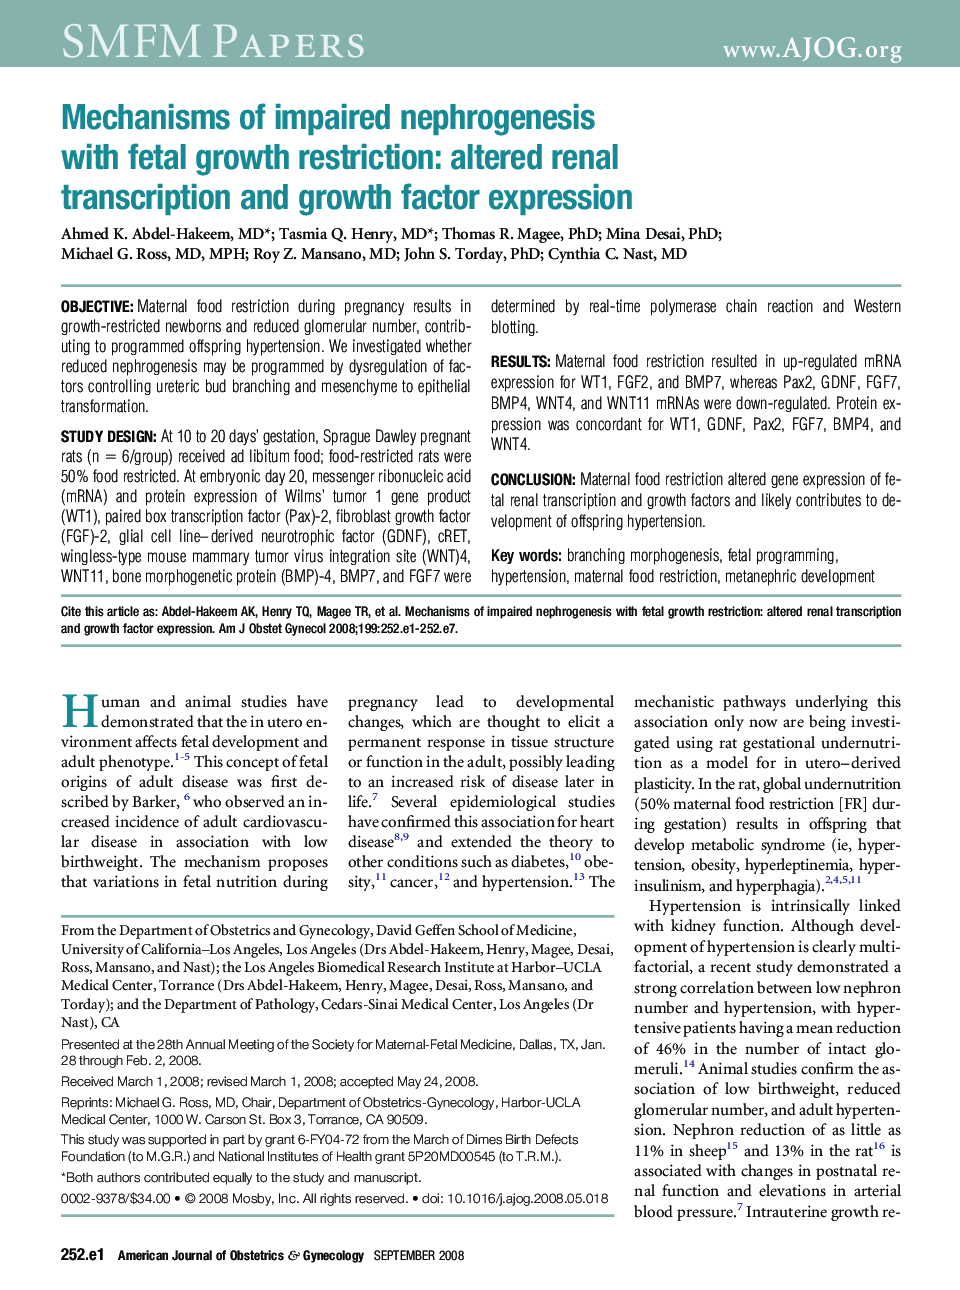 Mechanisms of impaired nephrogenesis with fetal growth restriction: altered renal transcription and growth factor expression